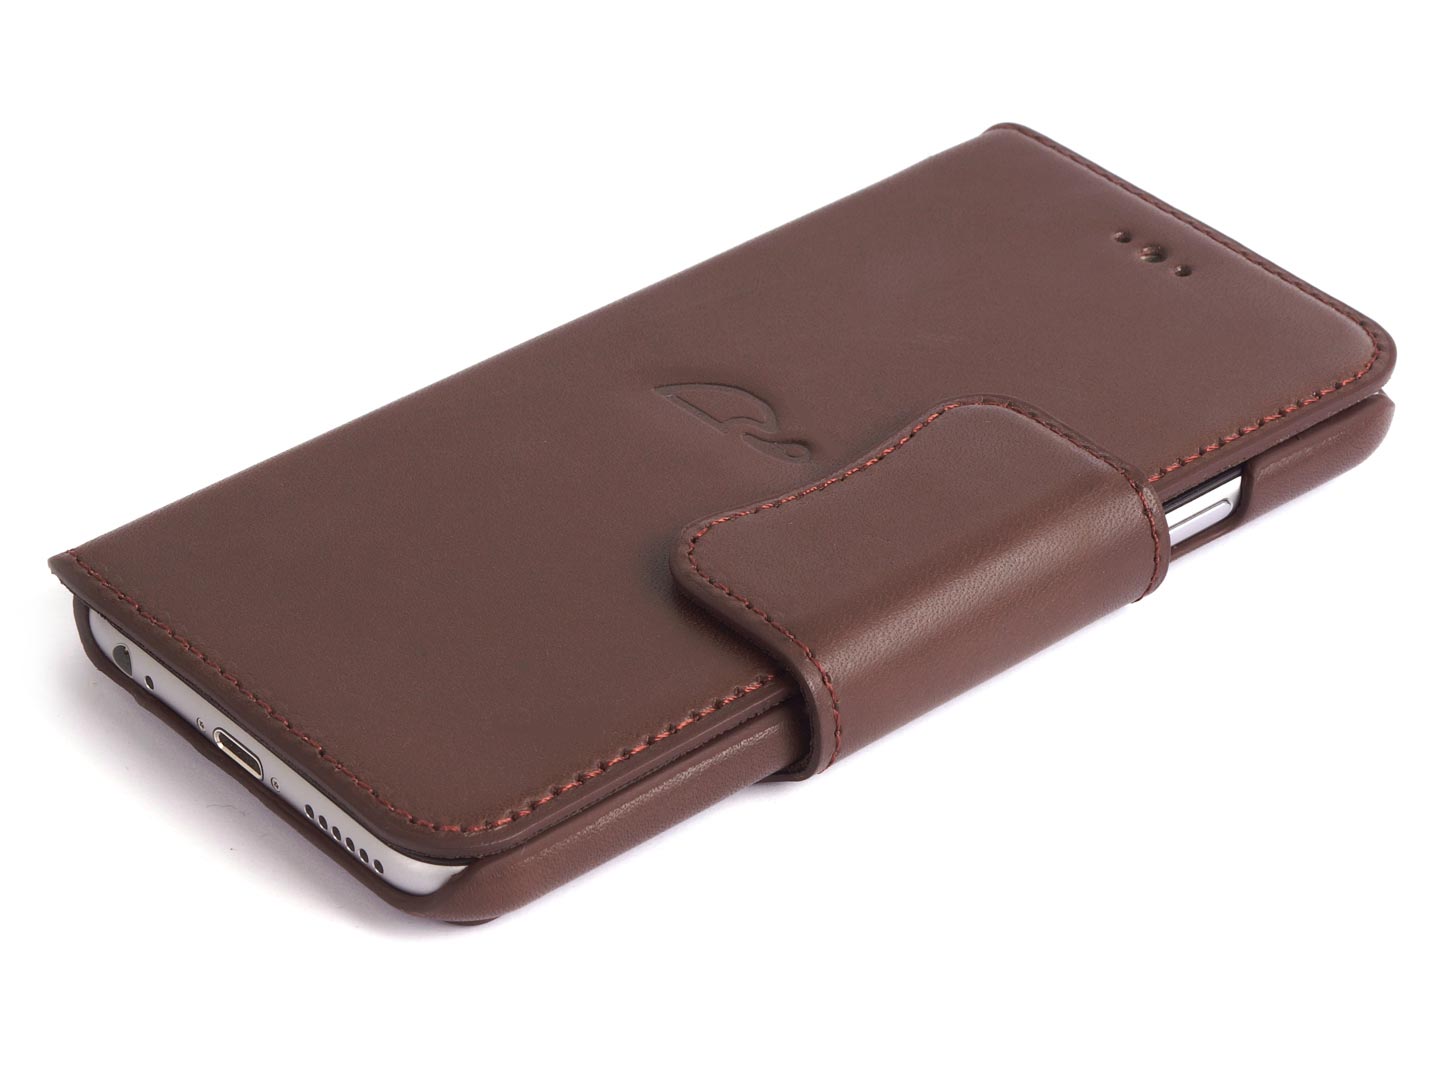 Wallet case iPhone 6 - brown leather - Carapaz